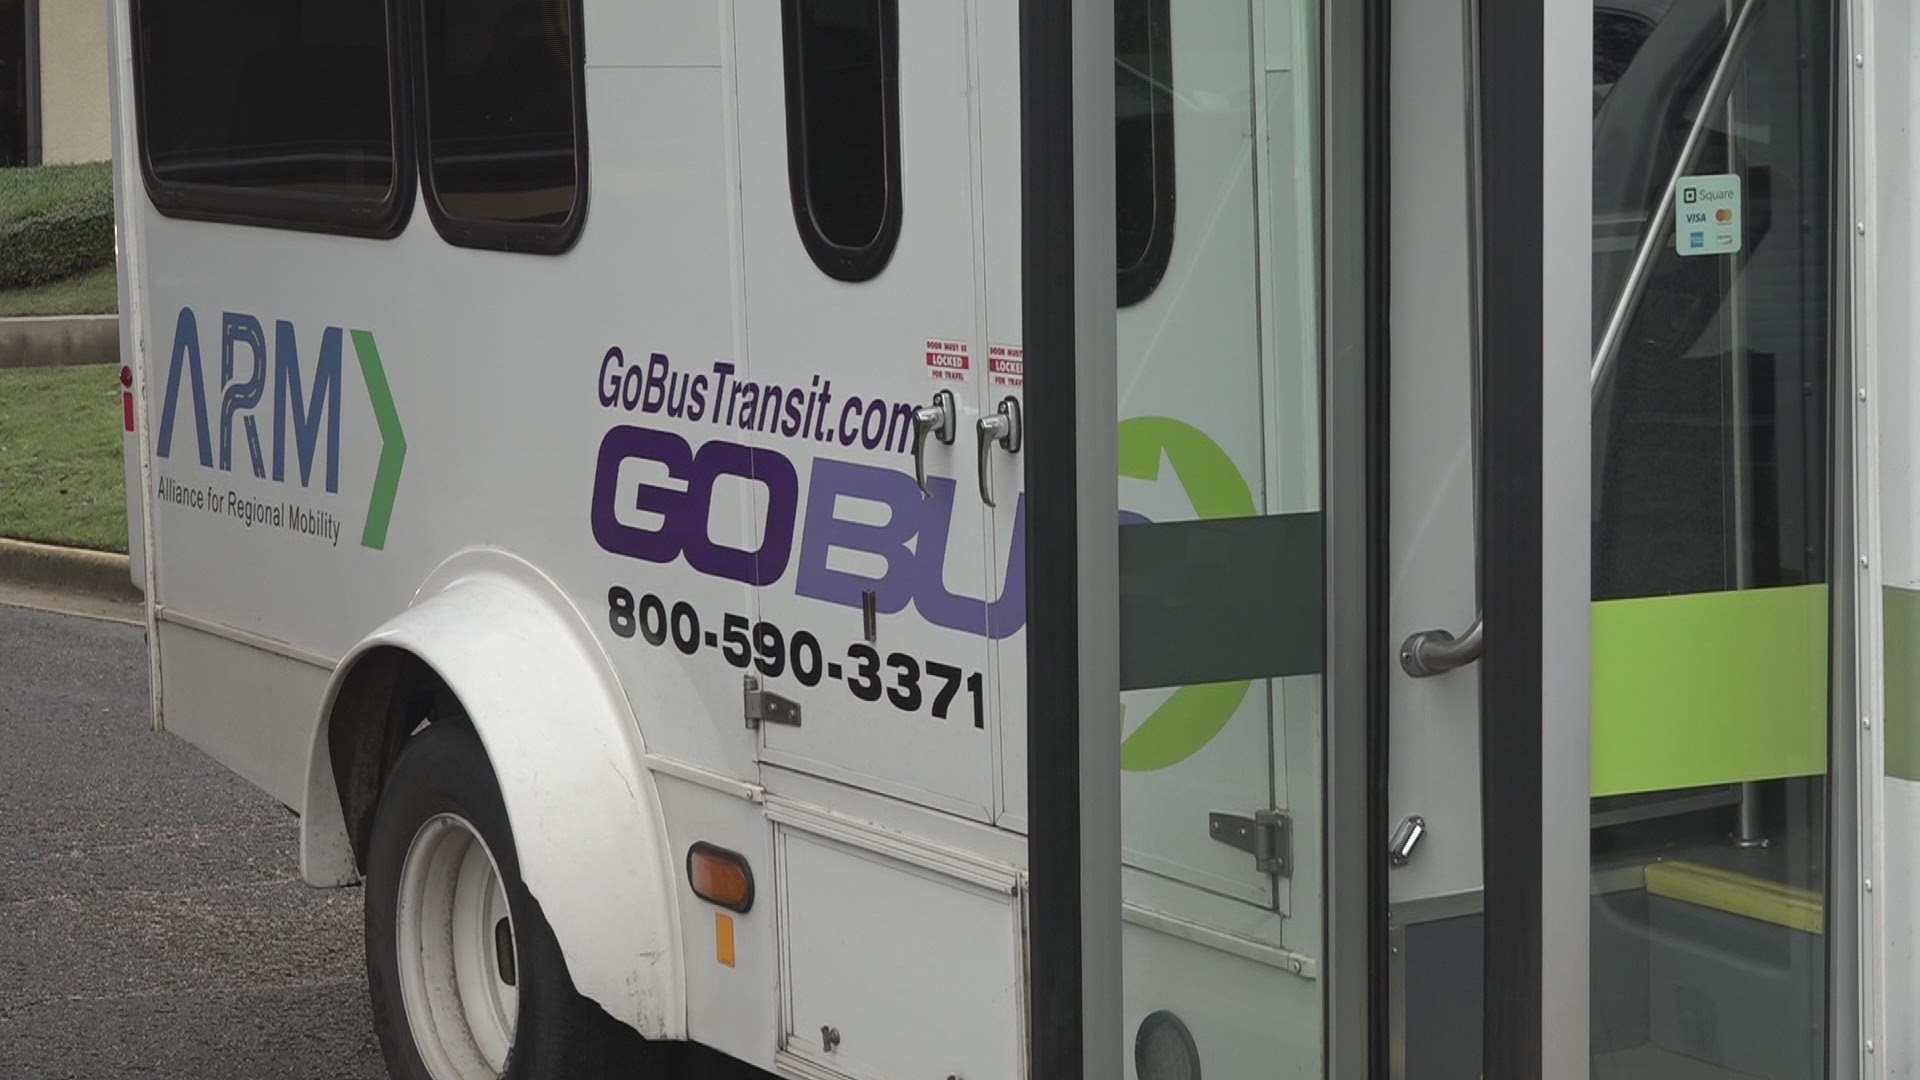 GoBus is planning to use that $10,000 and donate it for trips for people who need it.